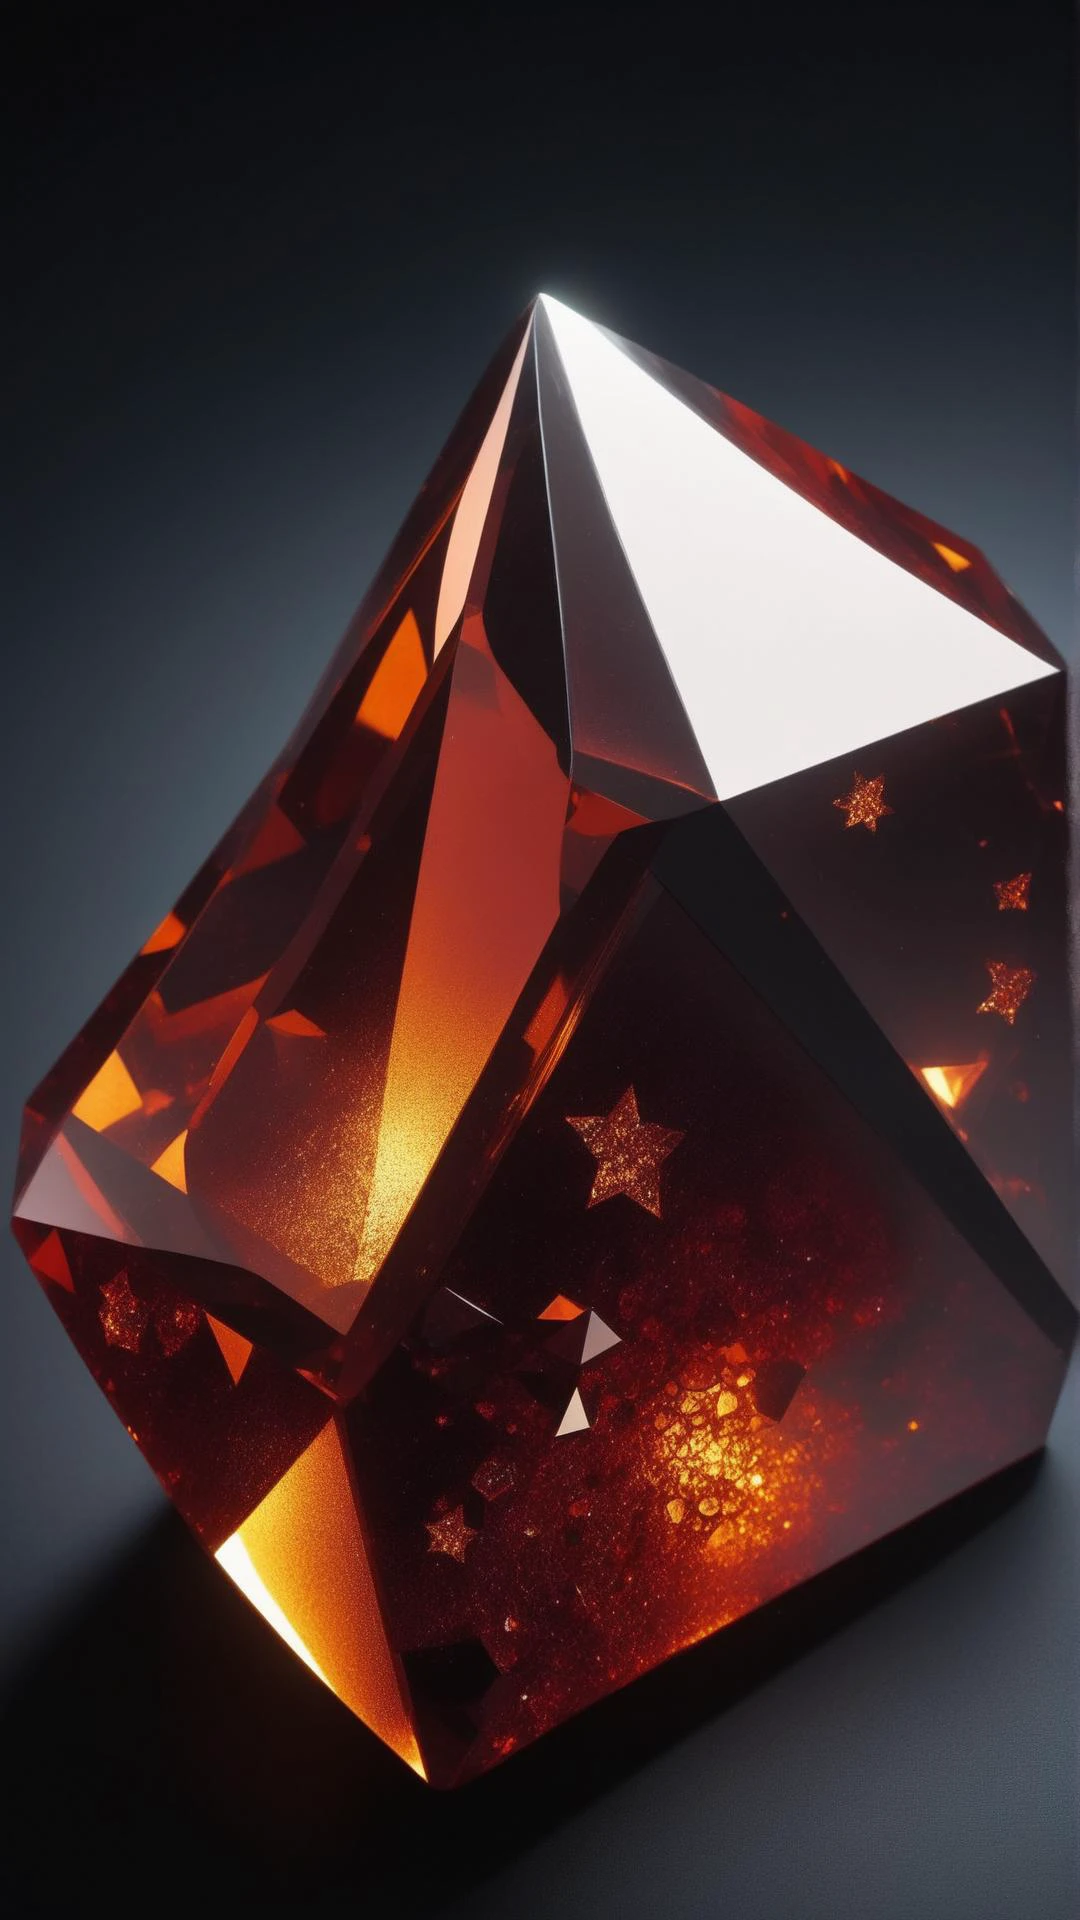 HalloweenGlowStyle glittering bewitching garnet (also a mineral), scintillating, platinum, prolonged lifespan, filling, uncommon, custom, new age, geometric patterns
, horror \(theme\),  dark, atmospheric, night, glow, (Masterpiece:1.3) (best quality:1.2) (high quality:1.1)